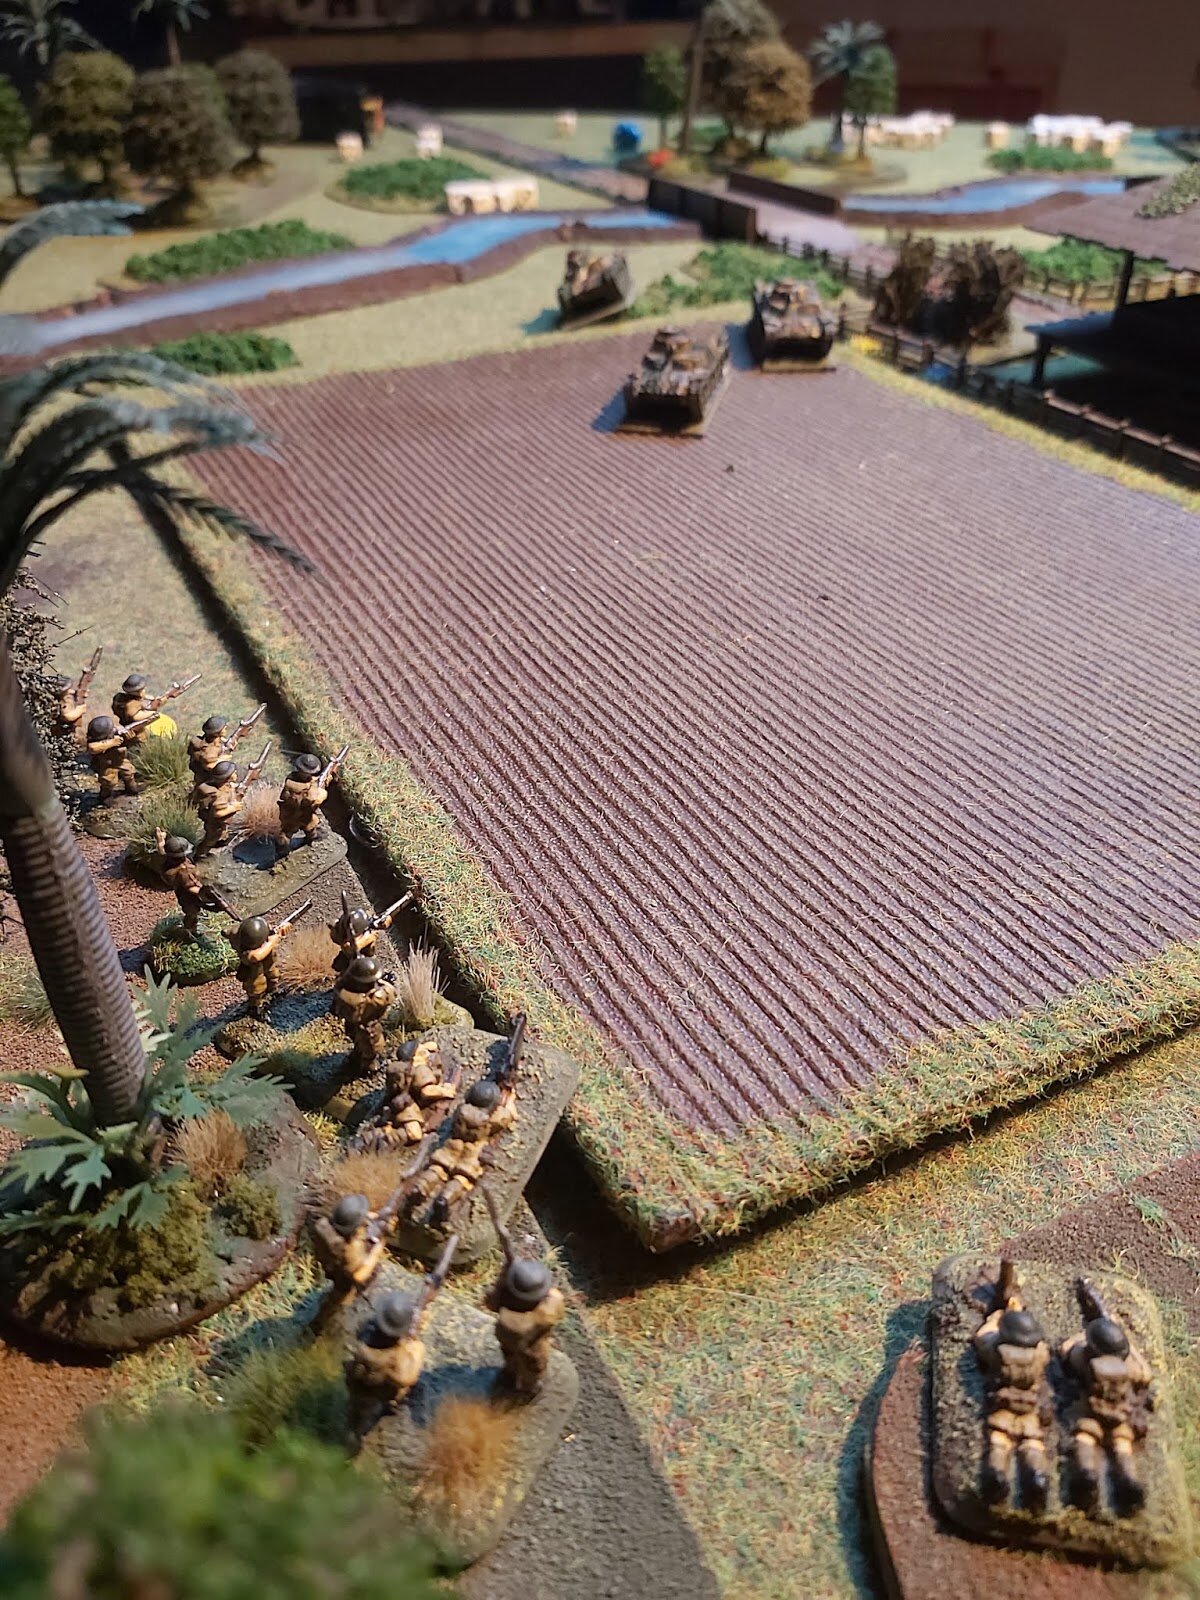 Heading towards the tree line, the tanks take ineffectual fire from the anti-tank rifles. 